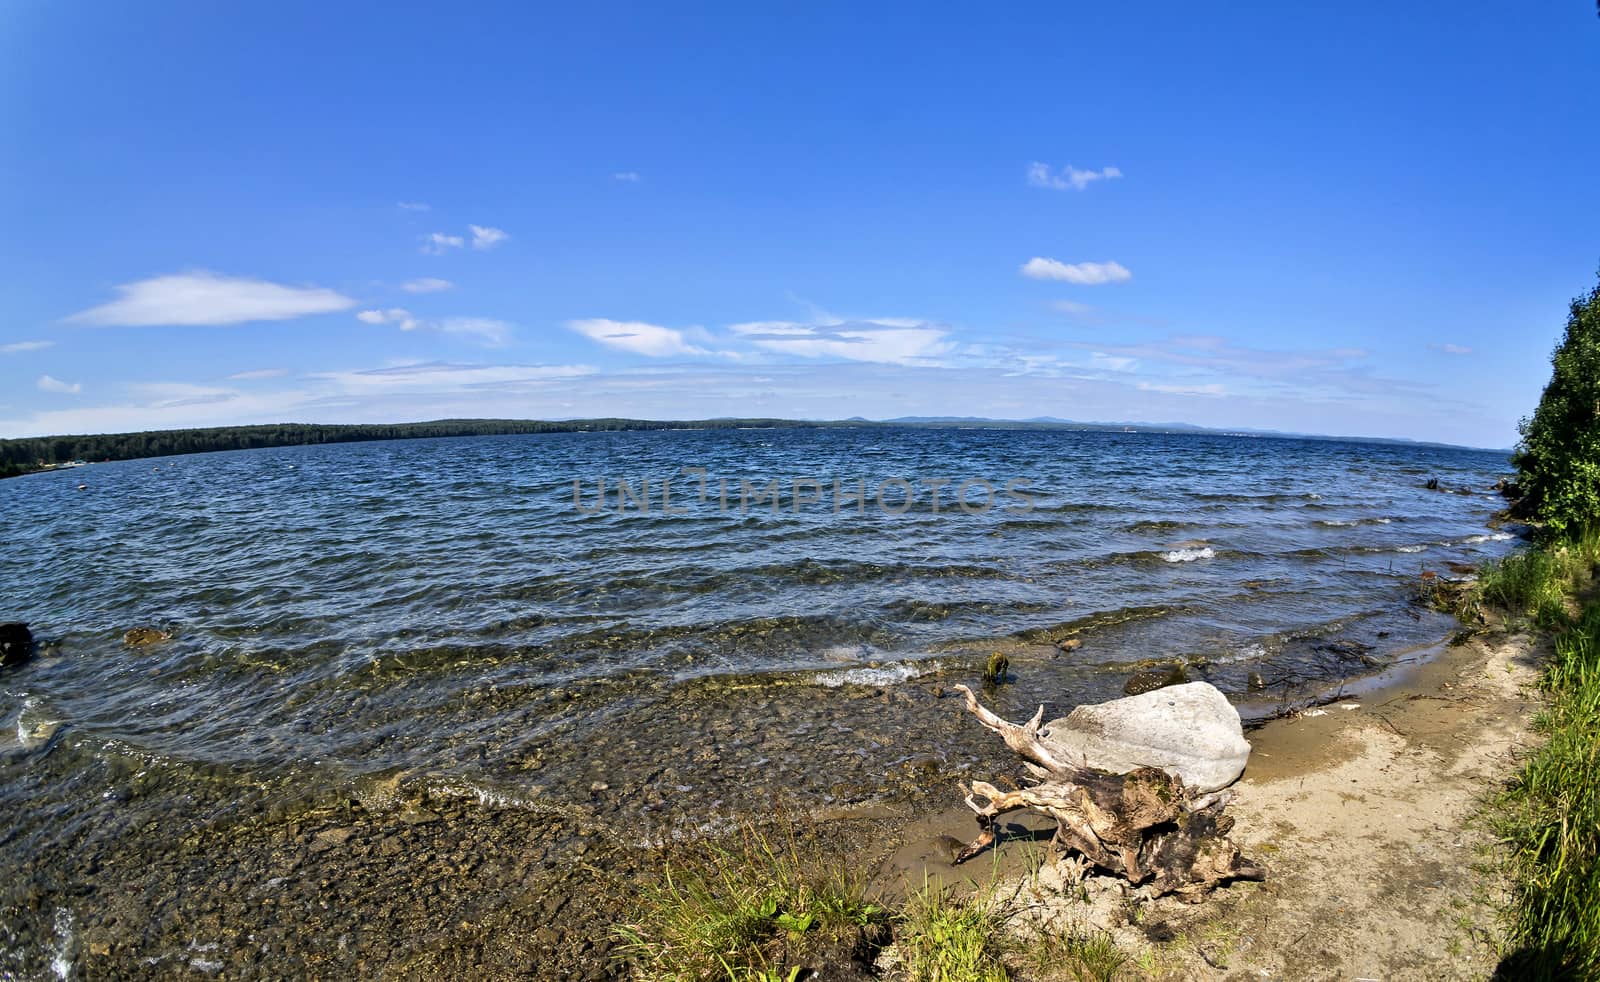 wooded and rocky shore on the background of the lake and the blue sky, fish-eye